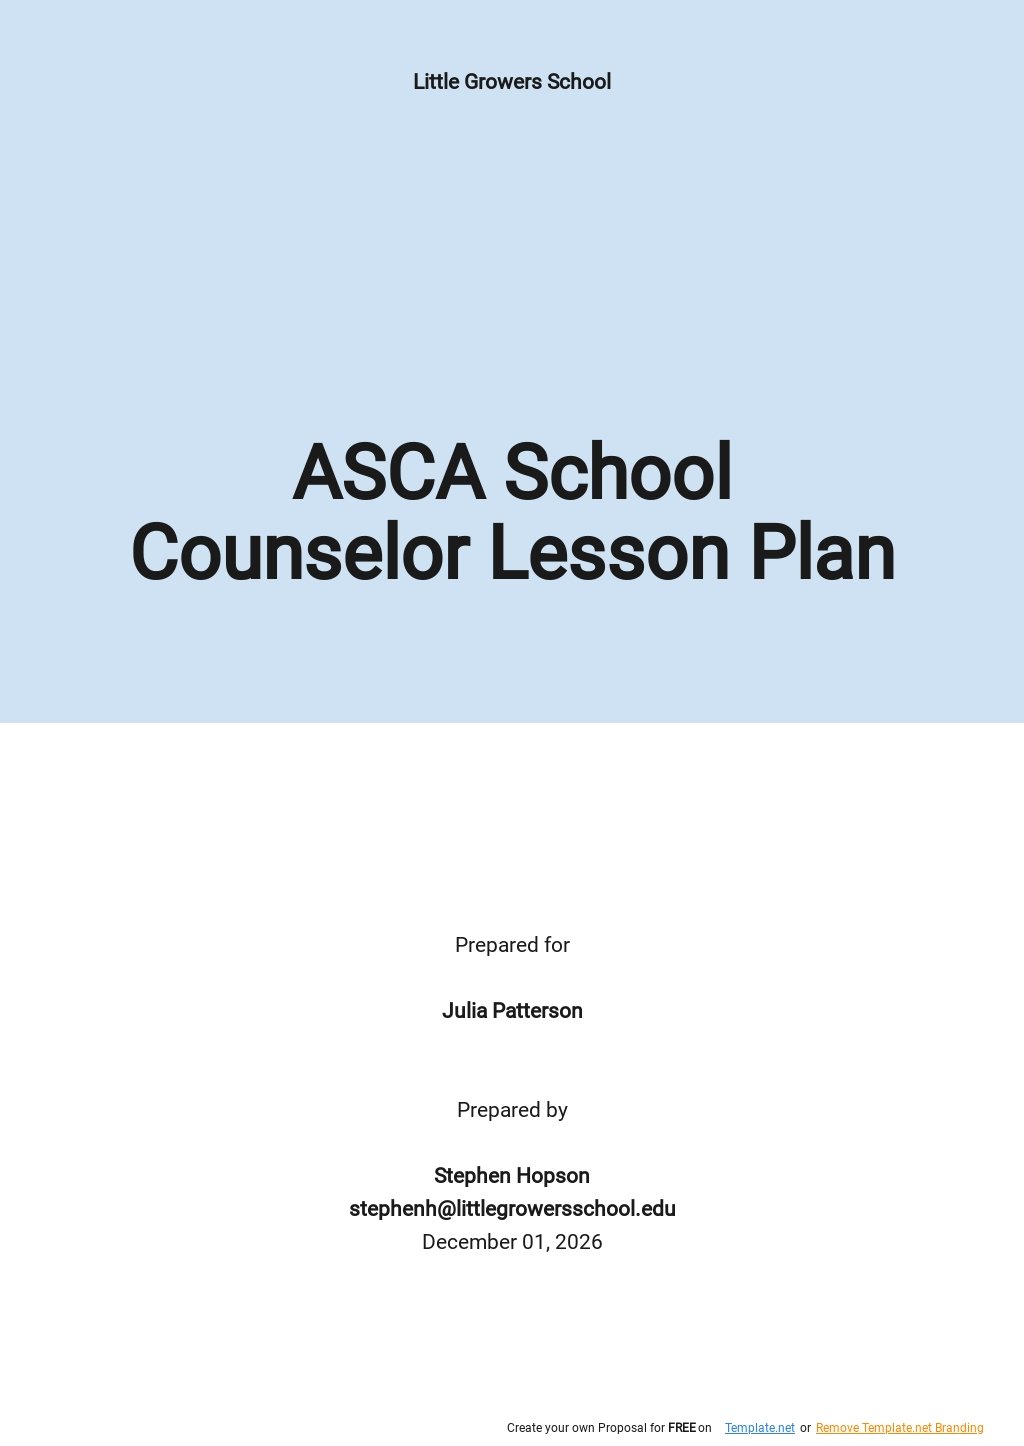 ASCA School Counselor Lesson Plan Template.jpe